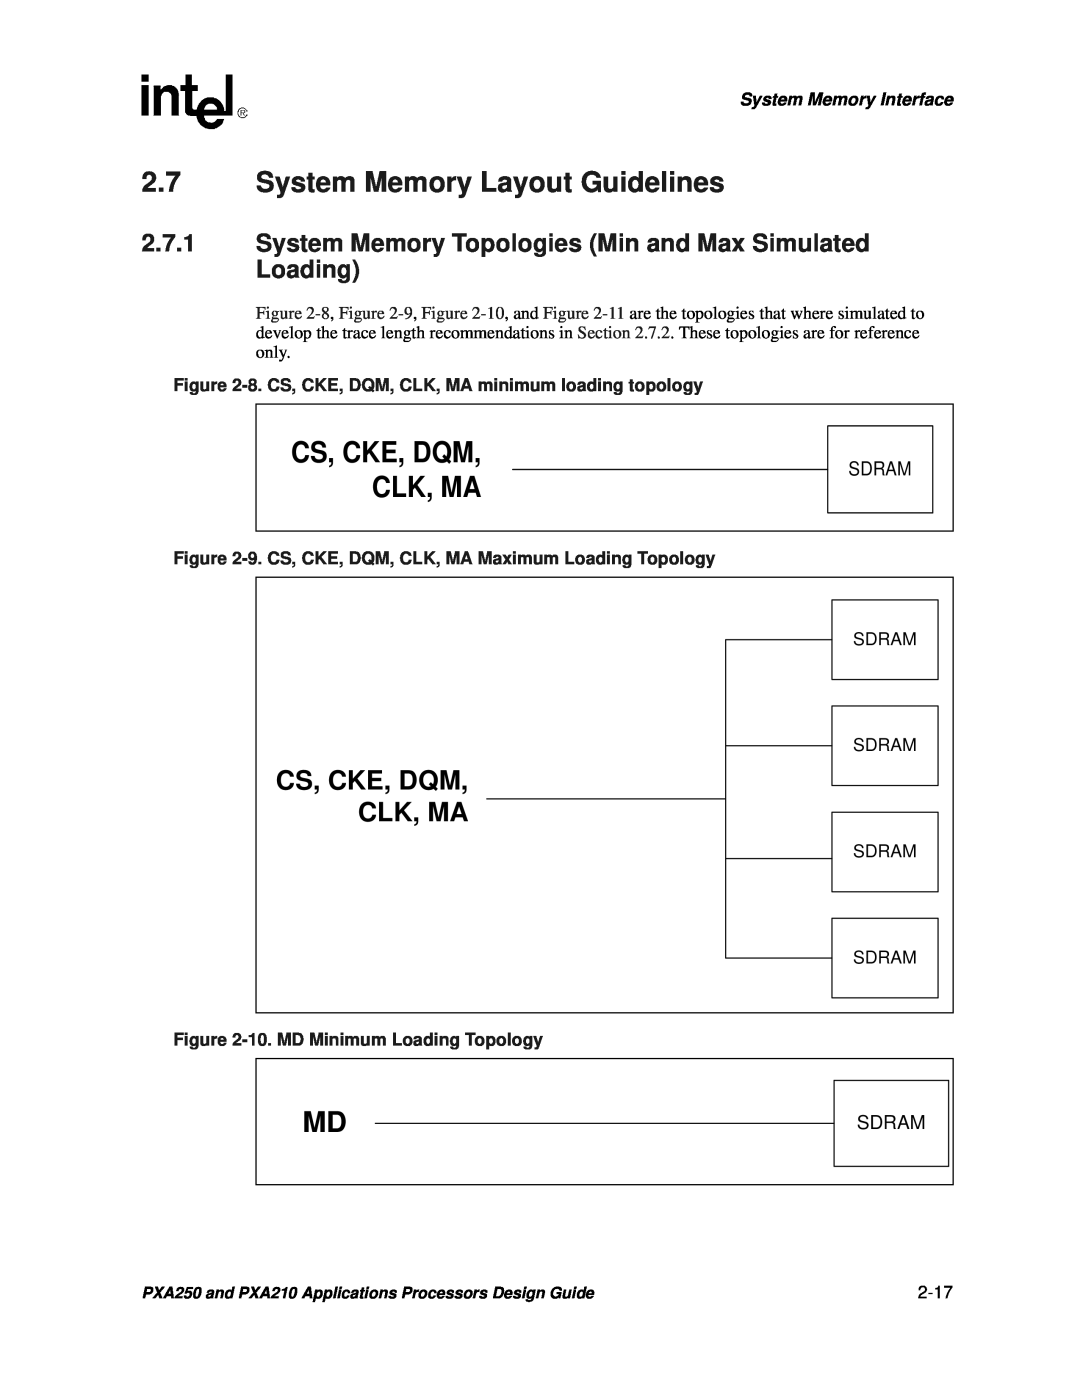 Intel PXA250 and PXA210 System Memory Layout Guidelines, System Memory Topologies Min and Max Simulated Loading, Sdram 